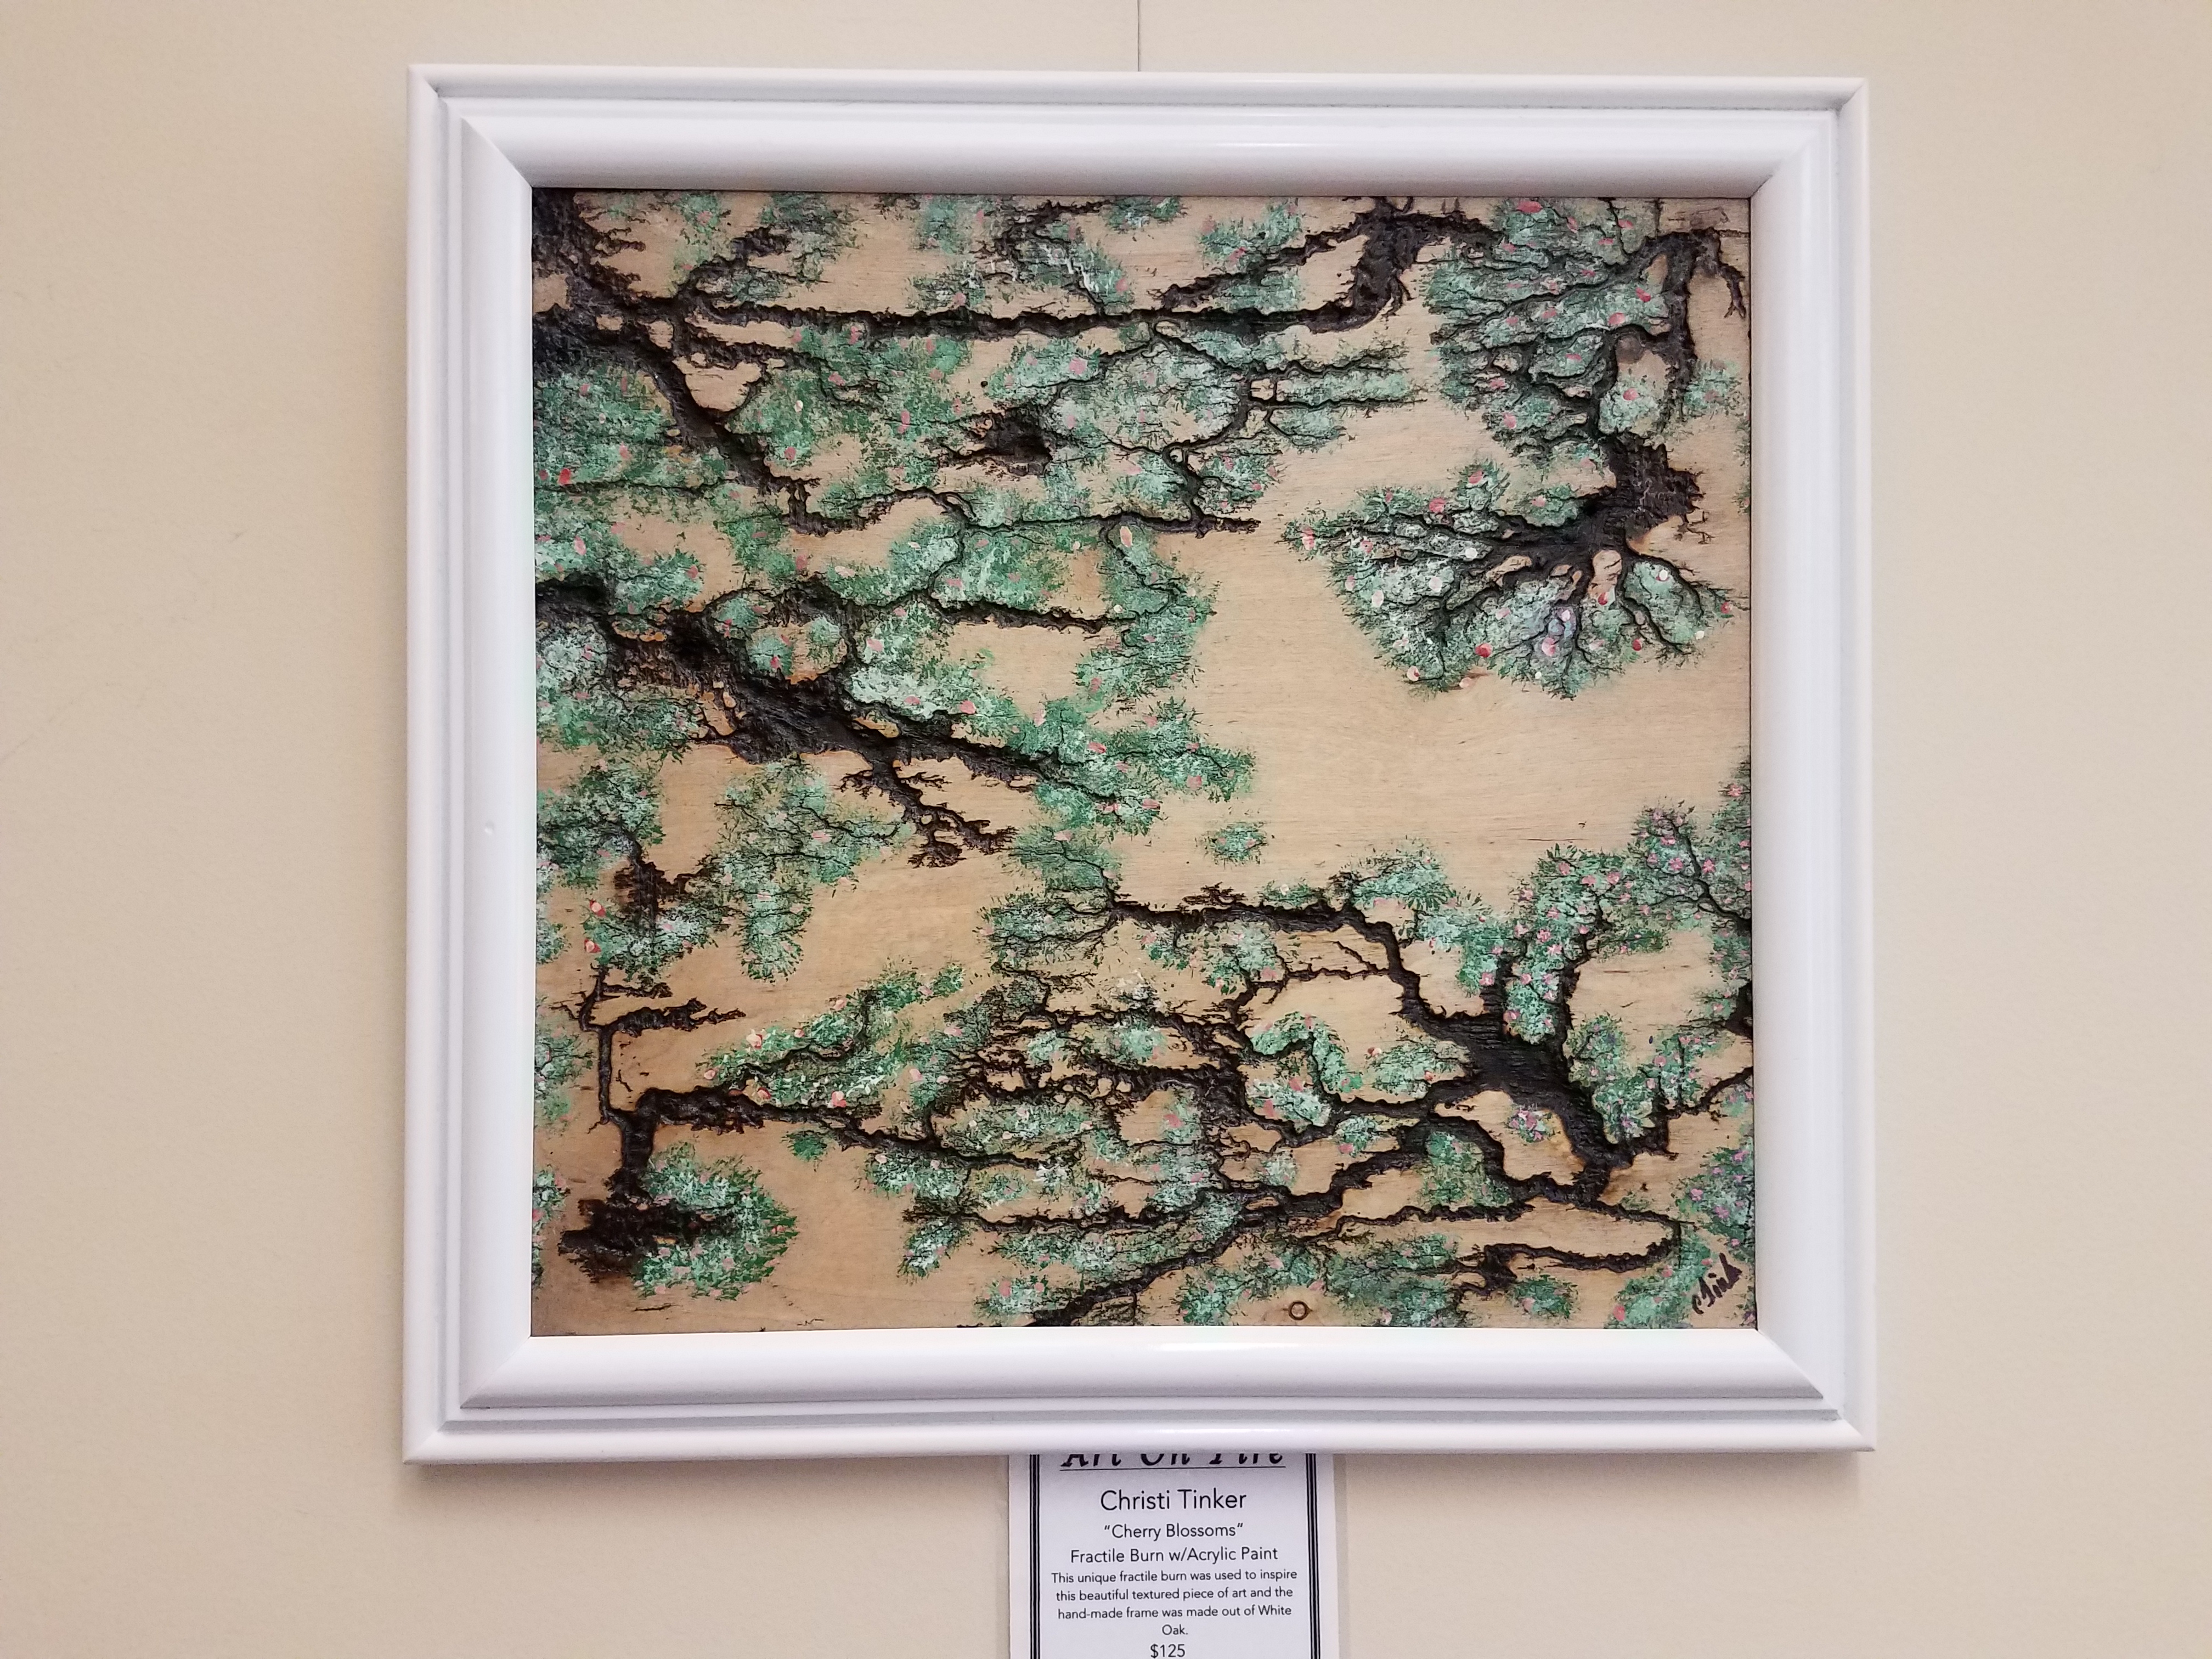 Christi Tinker’s “Cherry Blossoms” is on display for the USM Gulf Coast Library’s “Art on Fire” exhibit. 